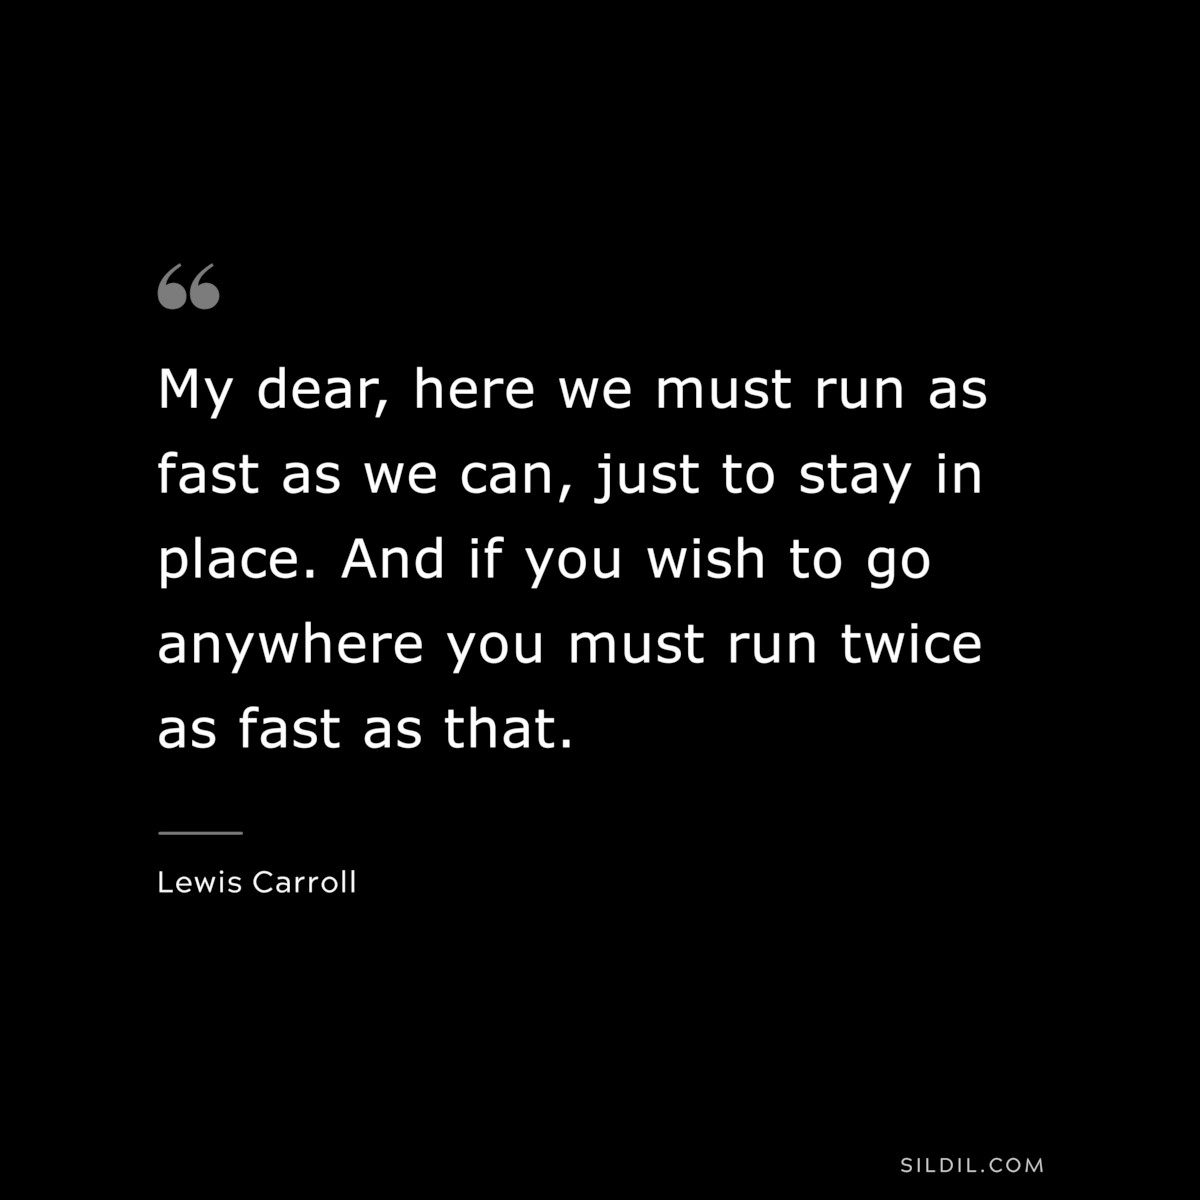 My dear, here we must run as fast as we can, just to stay in place. And if you wish to go anywhere you must run twice as fast as that.